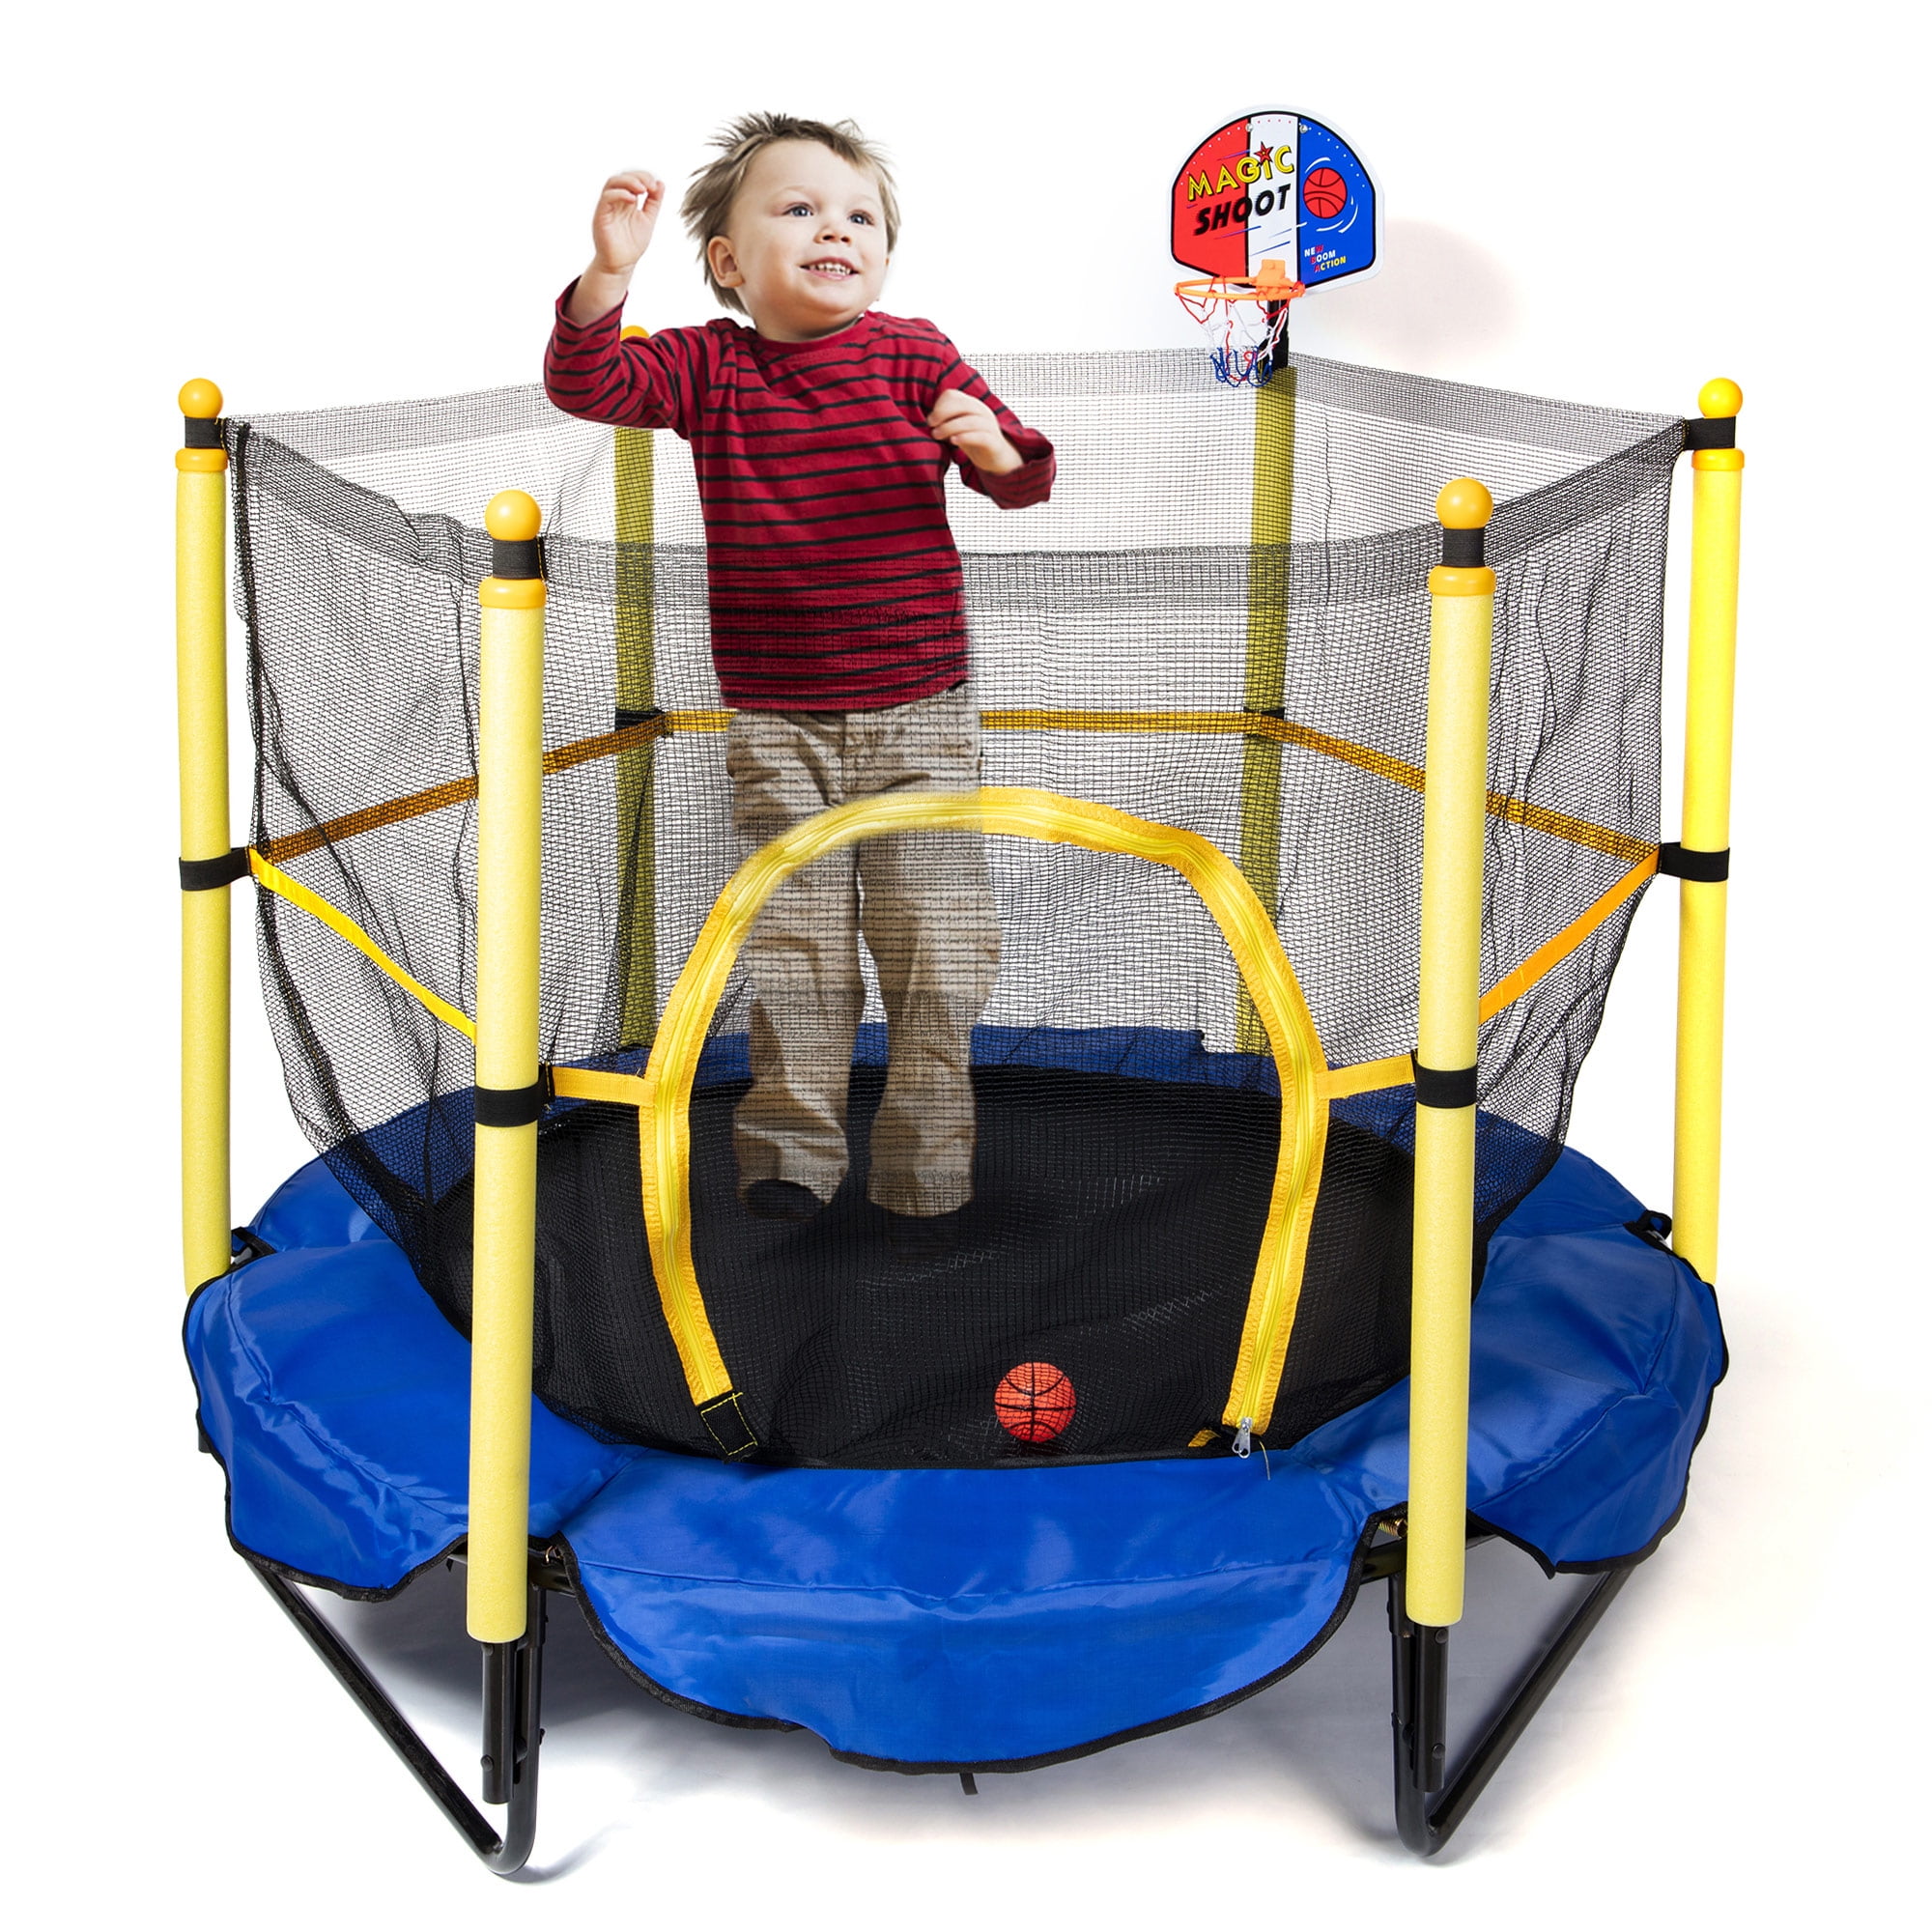 Zupapa Trampoline for Kids Toddler with Enclosure Net Basketball Hoop Mini Small Trampolines for Indoor Outdoor Gift for Children Baby Age 2-8,54inch,66inch